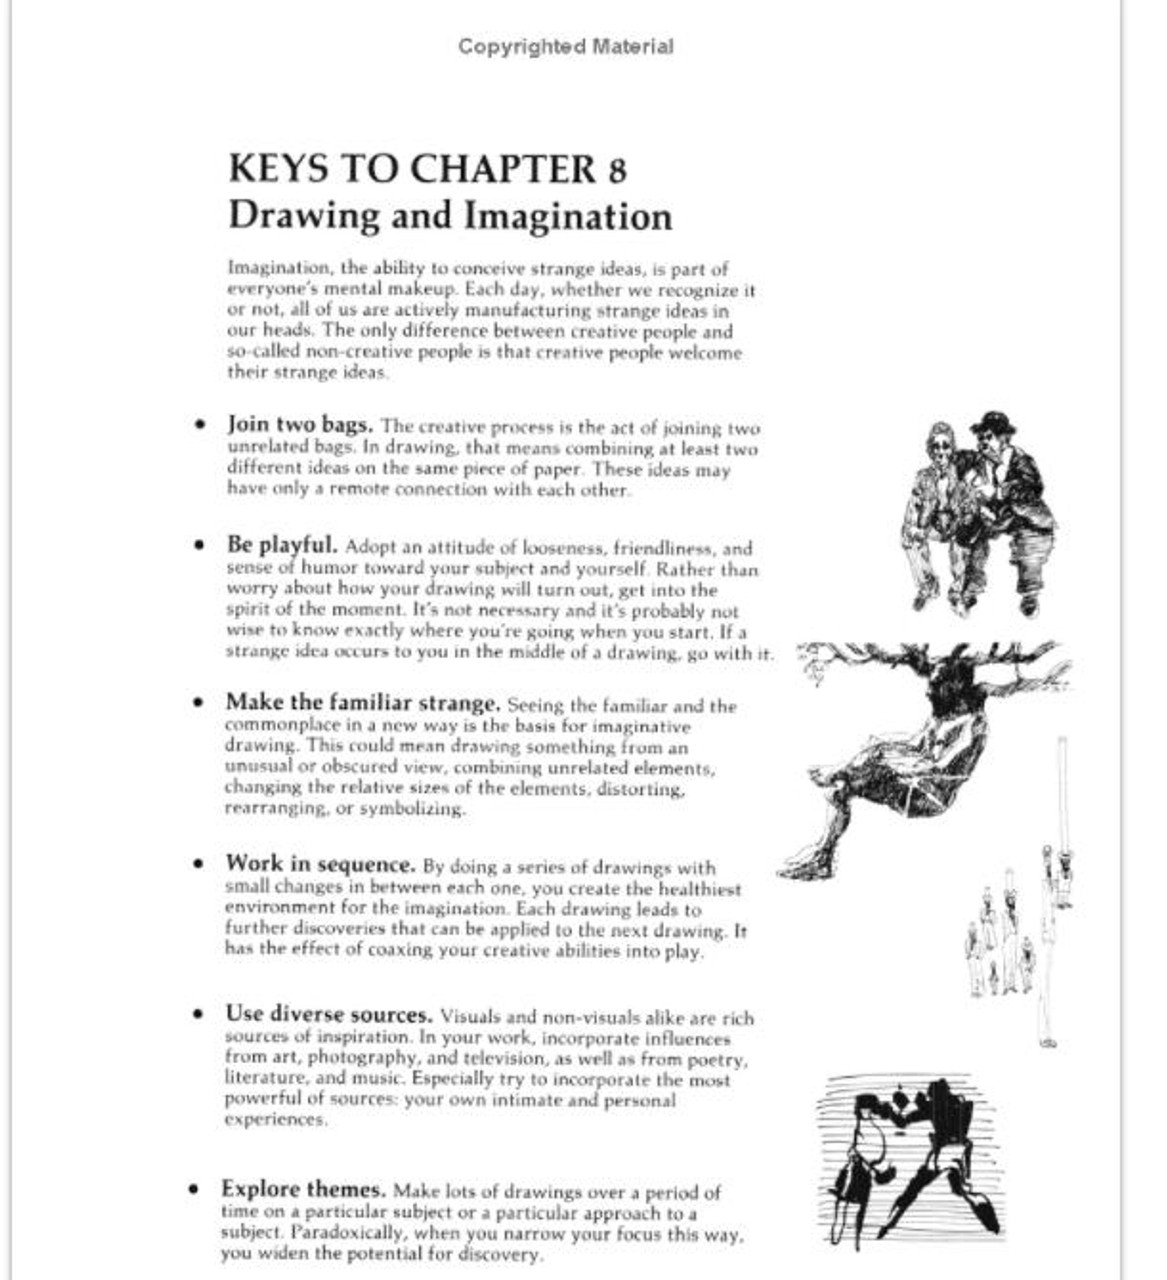 Keys to drawing with imagination - TCDC Resource Center